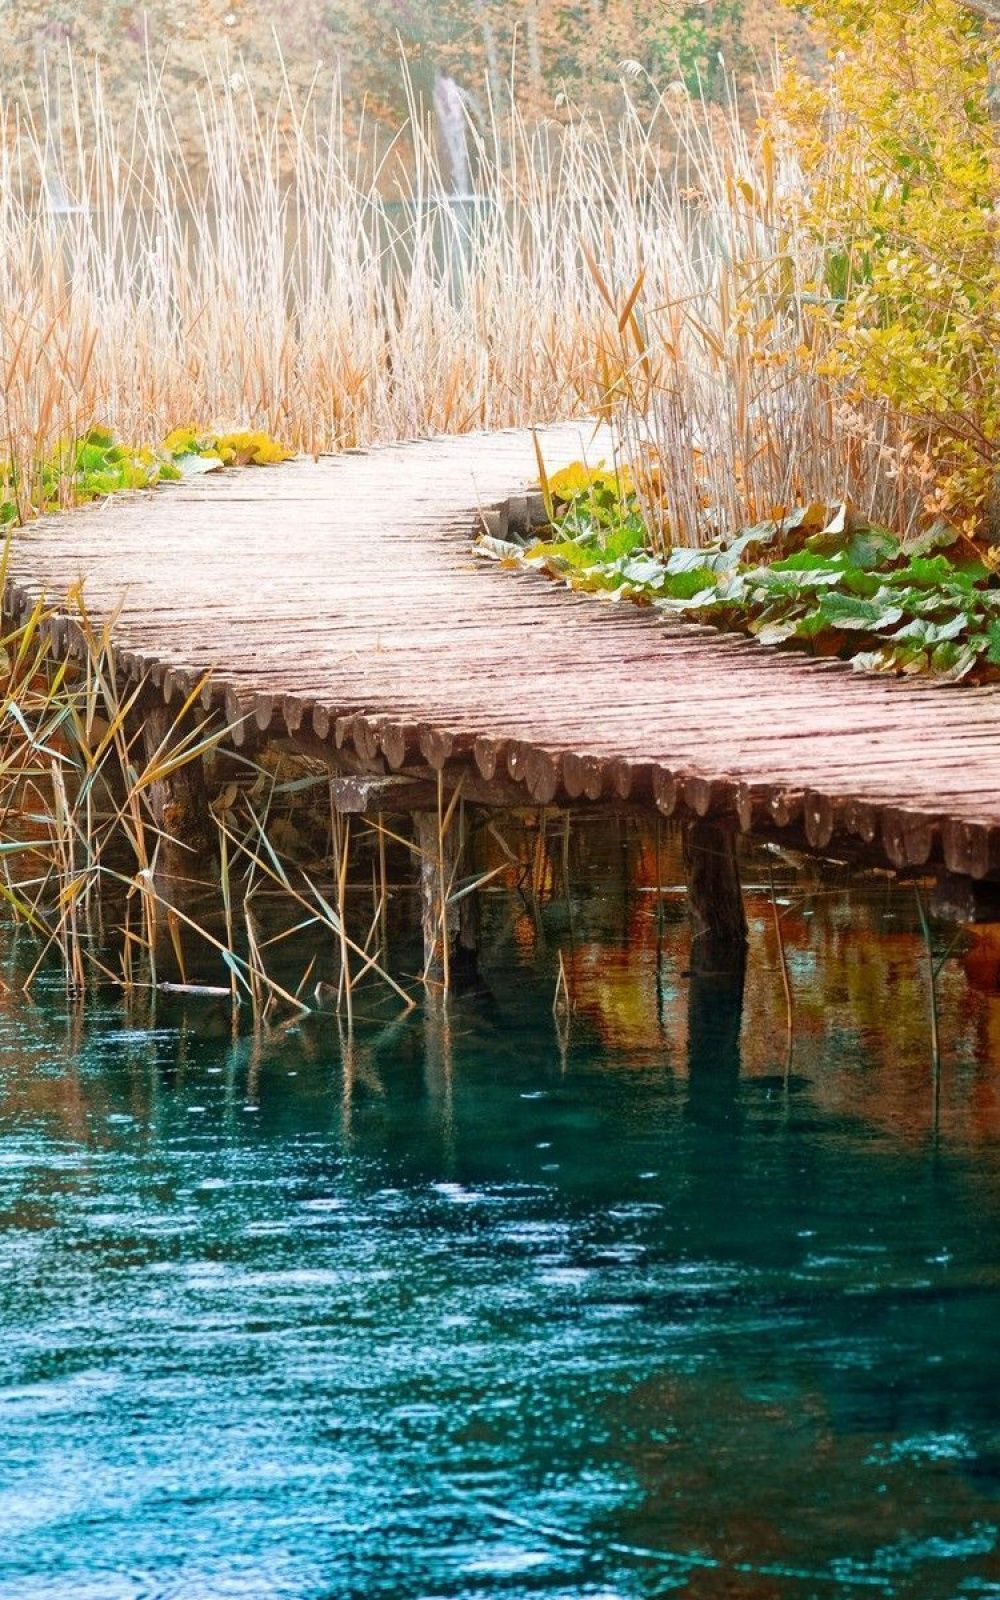 Wooden Bridge Painting Android Wallpaper free download